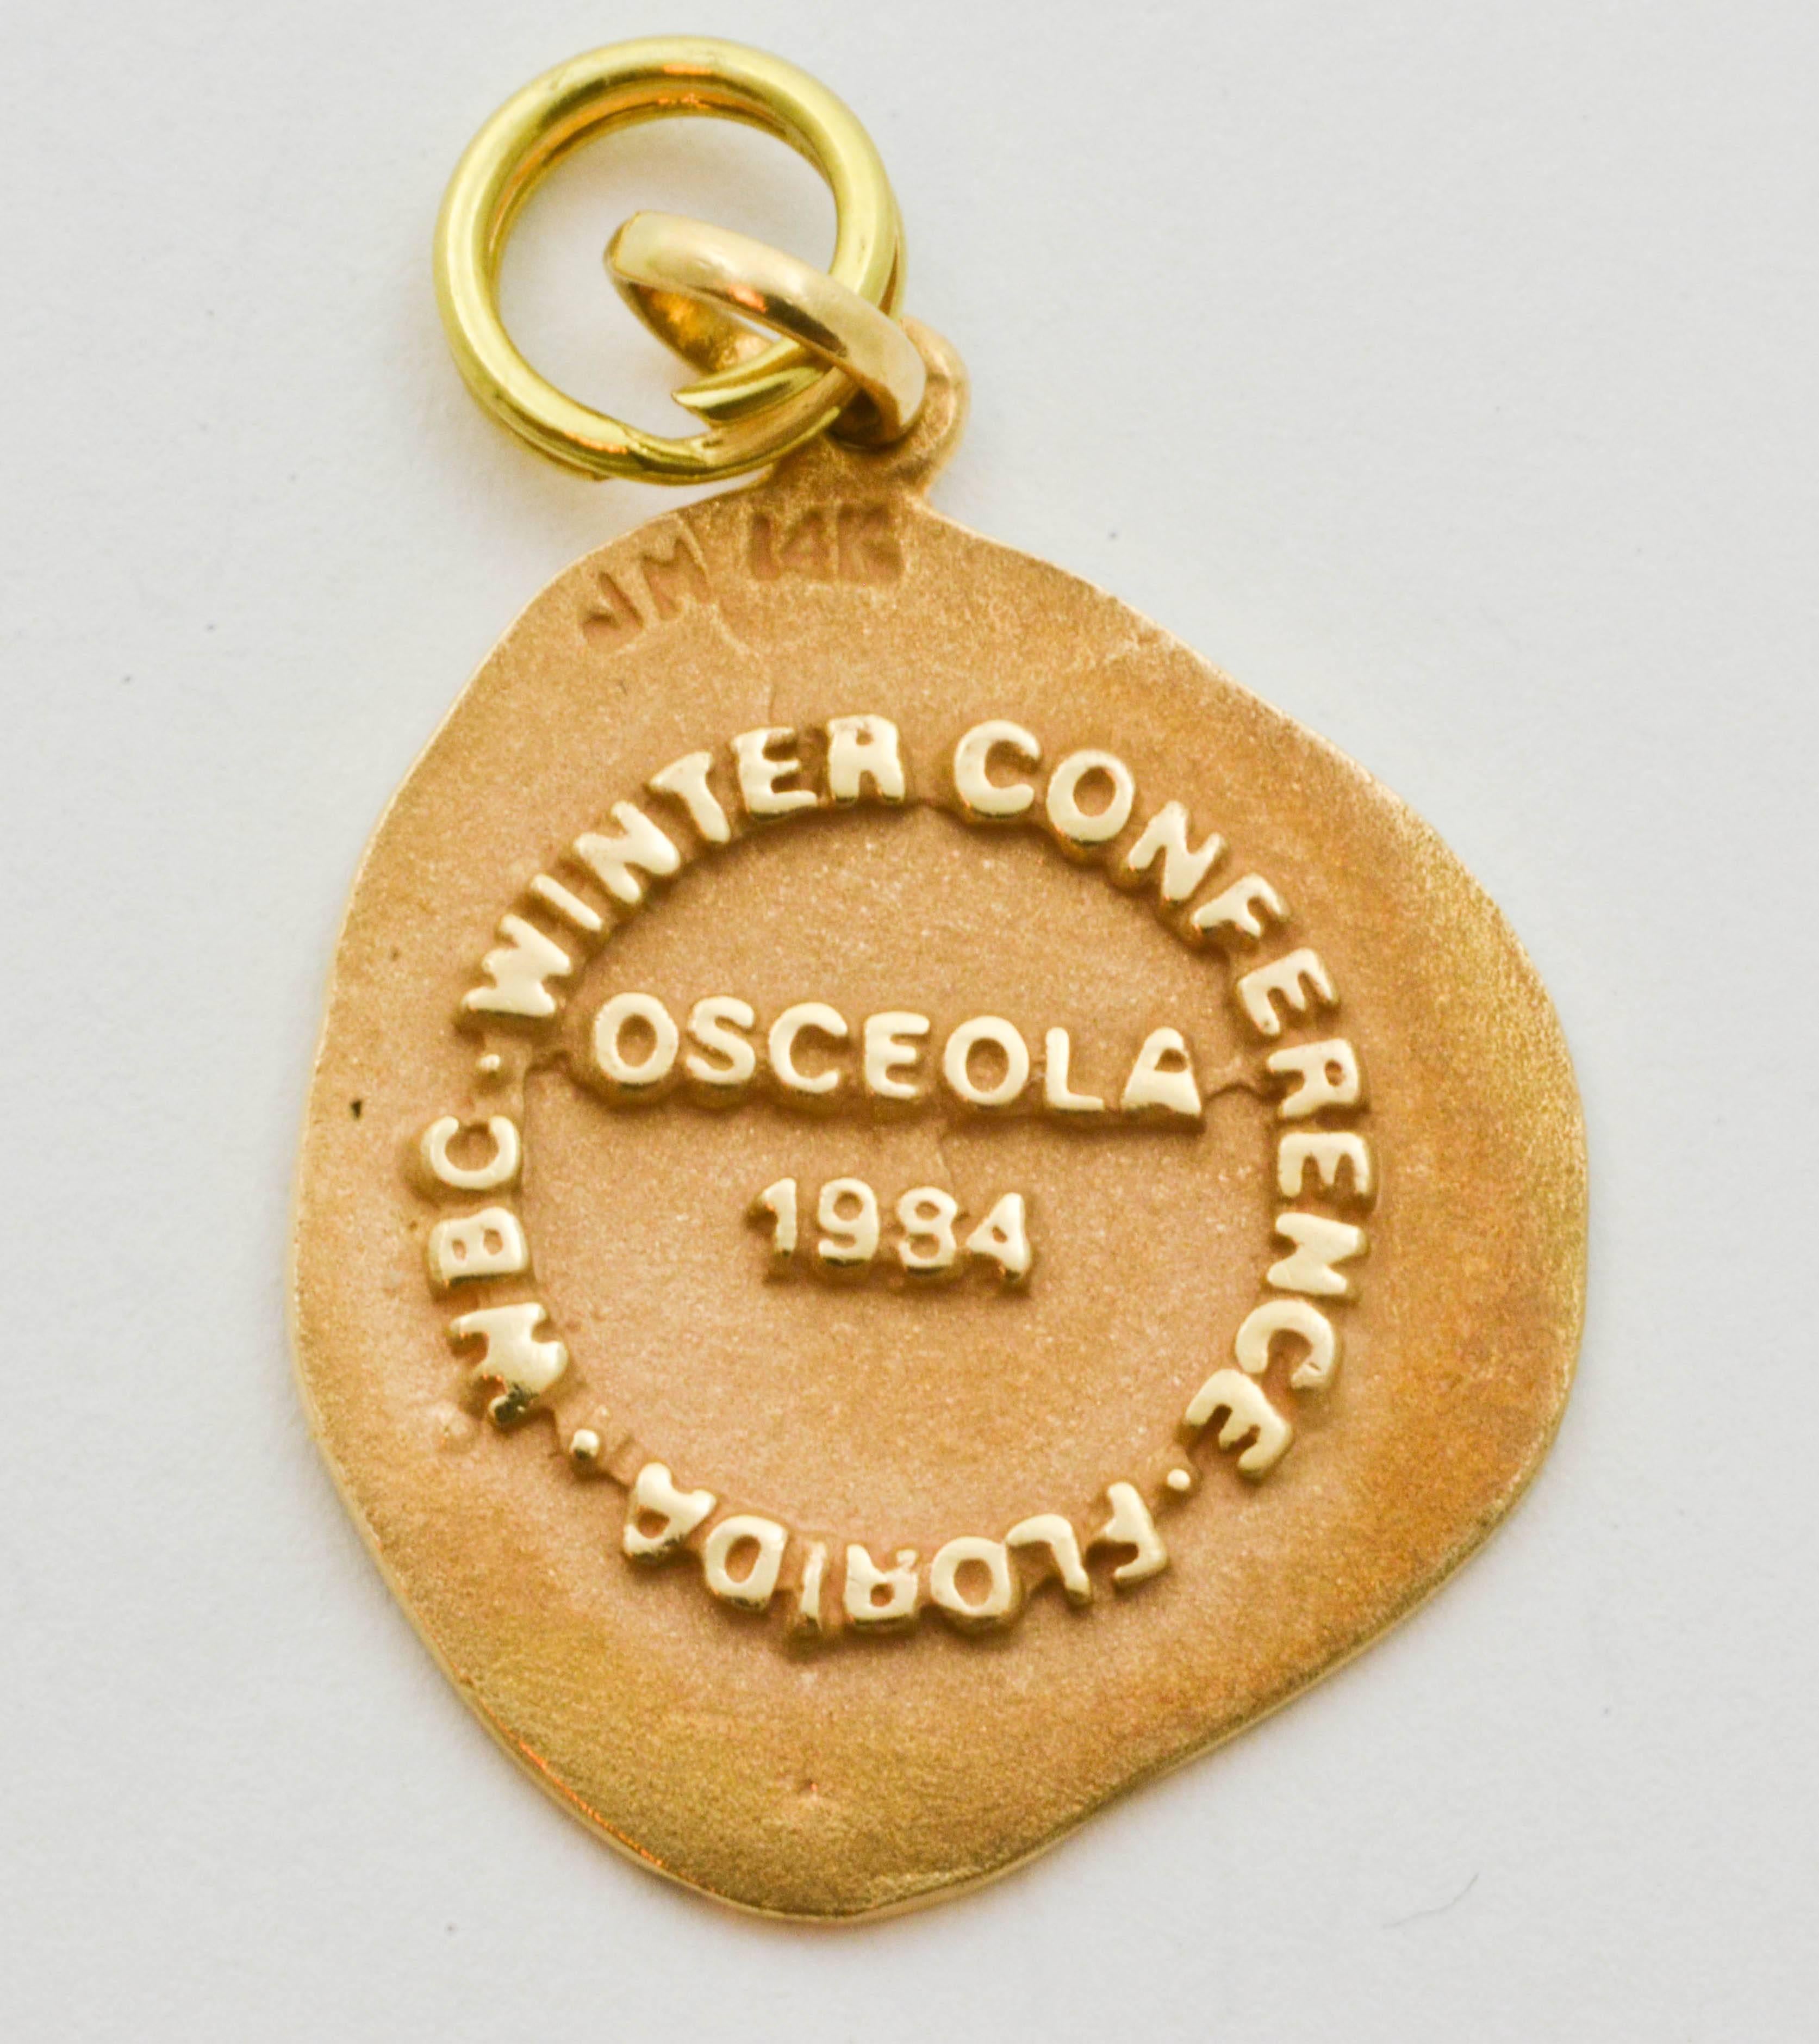 Carved in low relief, the regal image of a Native American is the feature of this 14 karat yellow gold charm. The reverse side is embossed with the words, “Winter Conference Florida WBC Osceola 1994.” Measuring 21.17x18.9x1.58mm and weighing 3.7g.